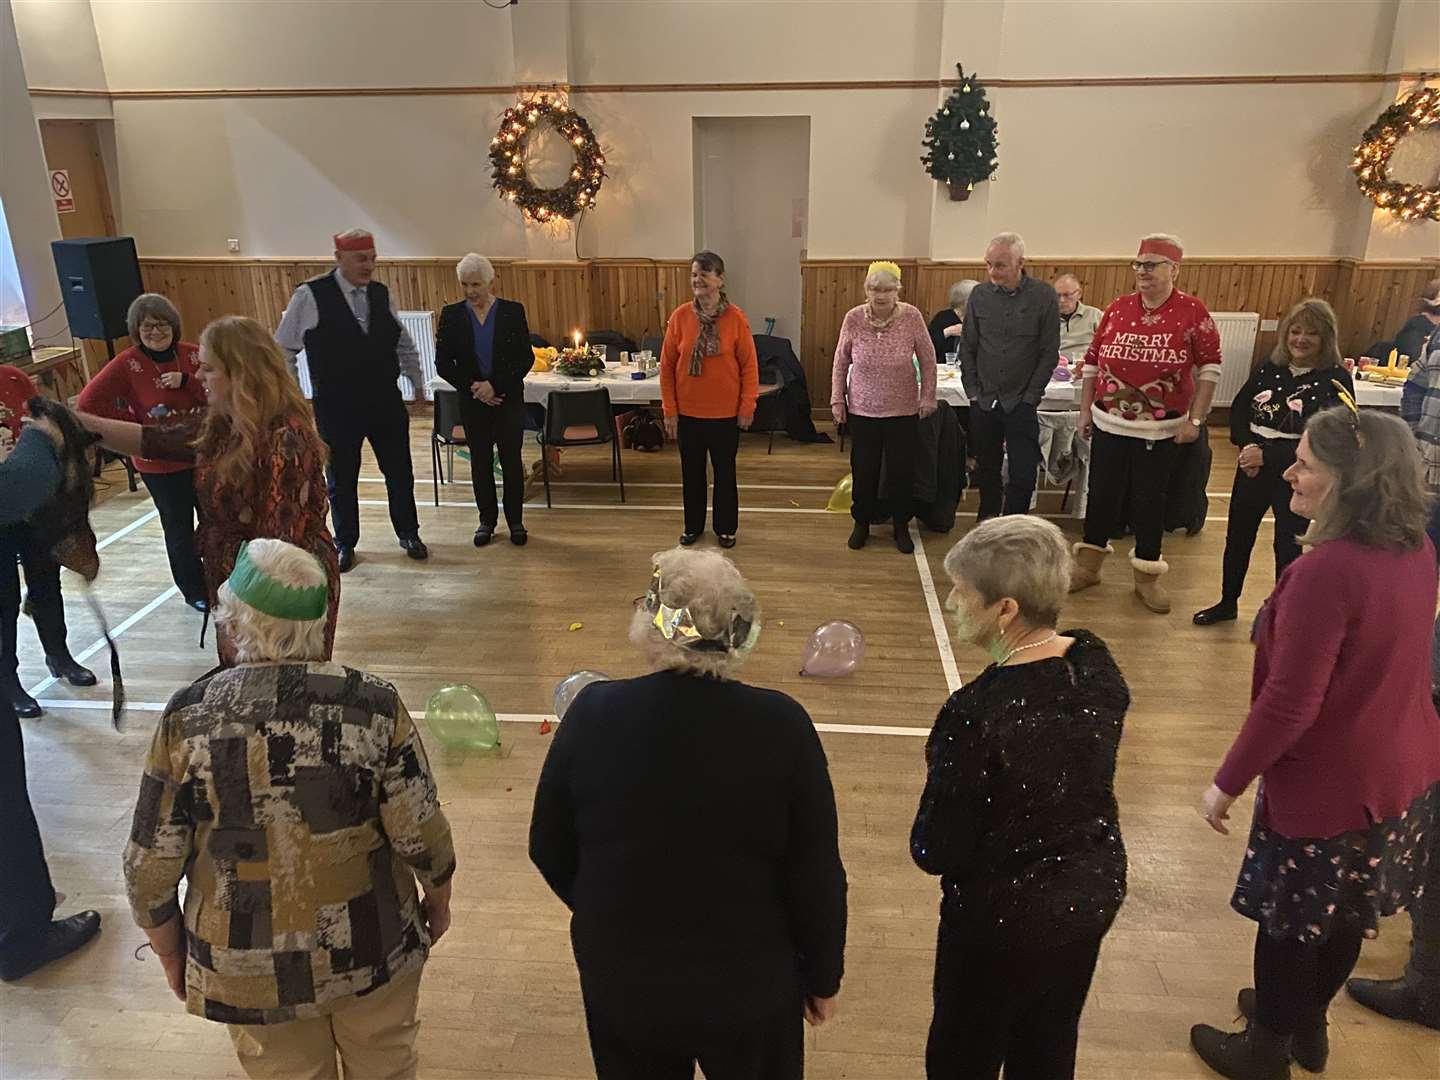 It was a traditional Christmas knees-up with plenty of games and activities